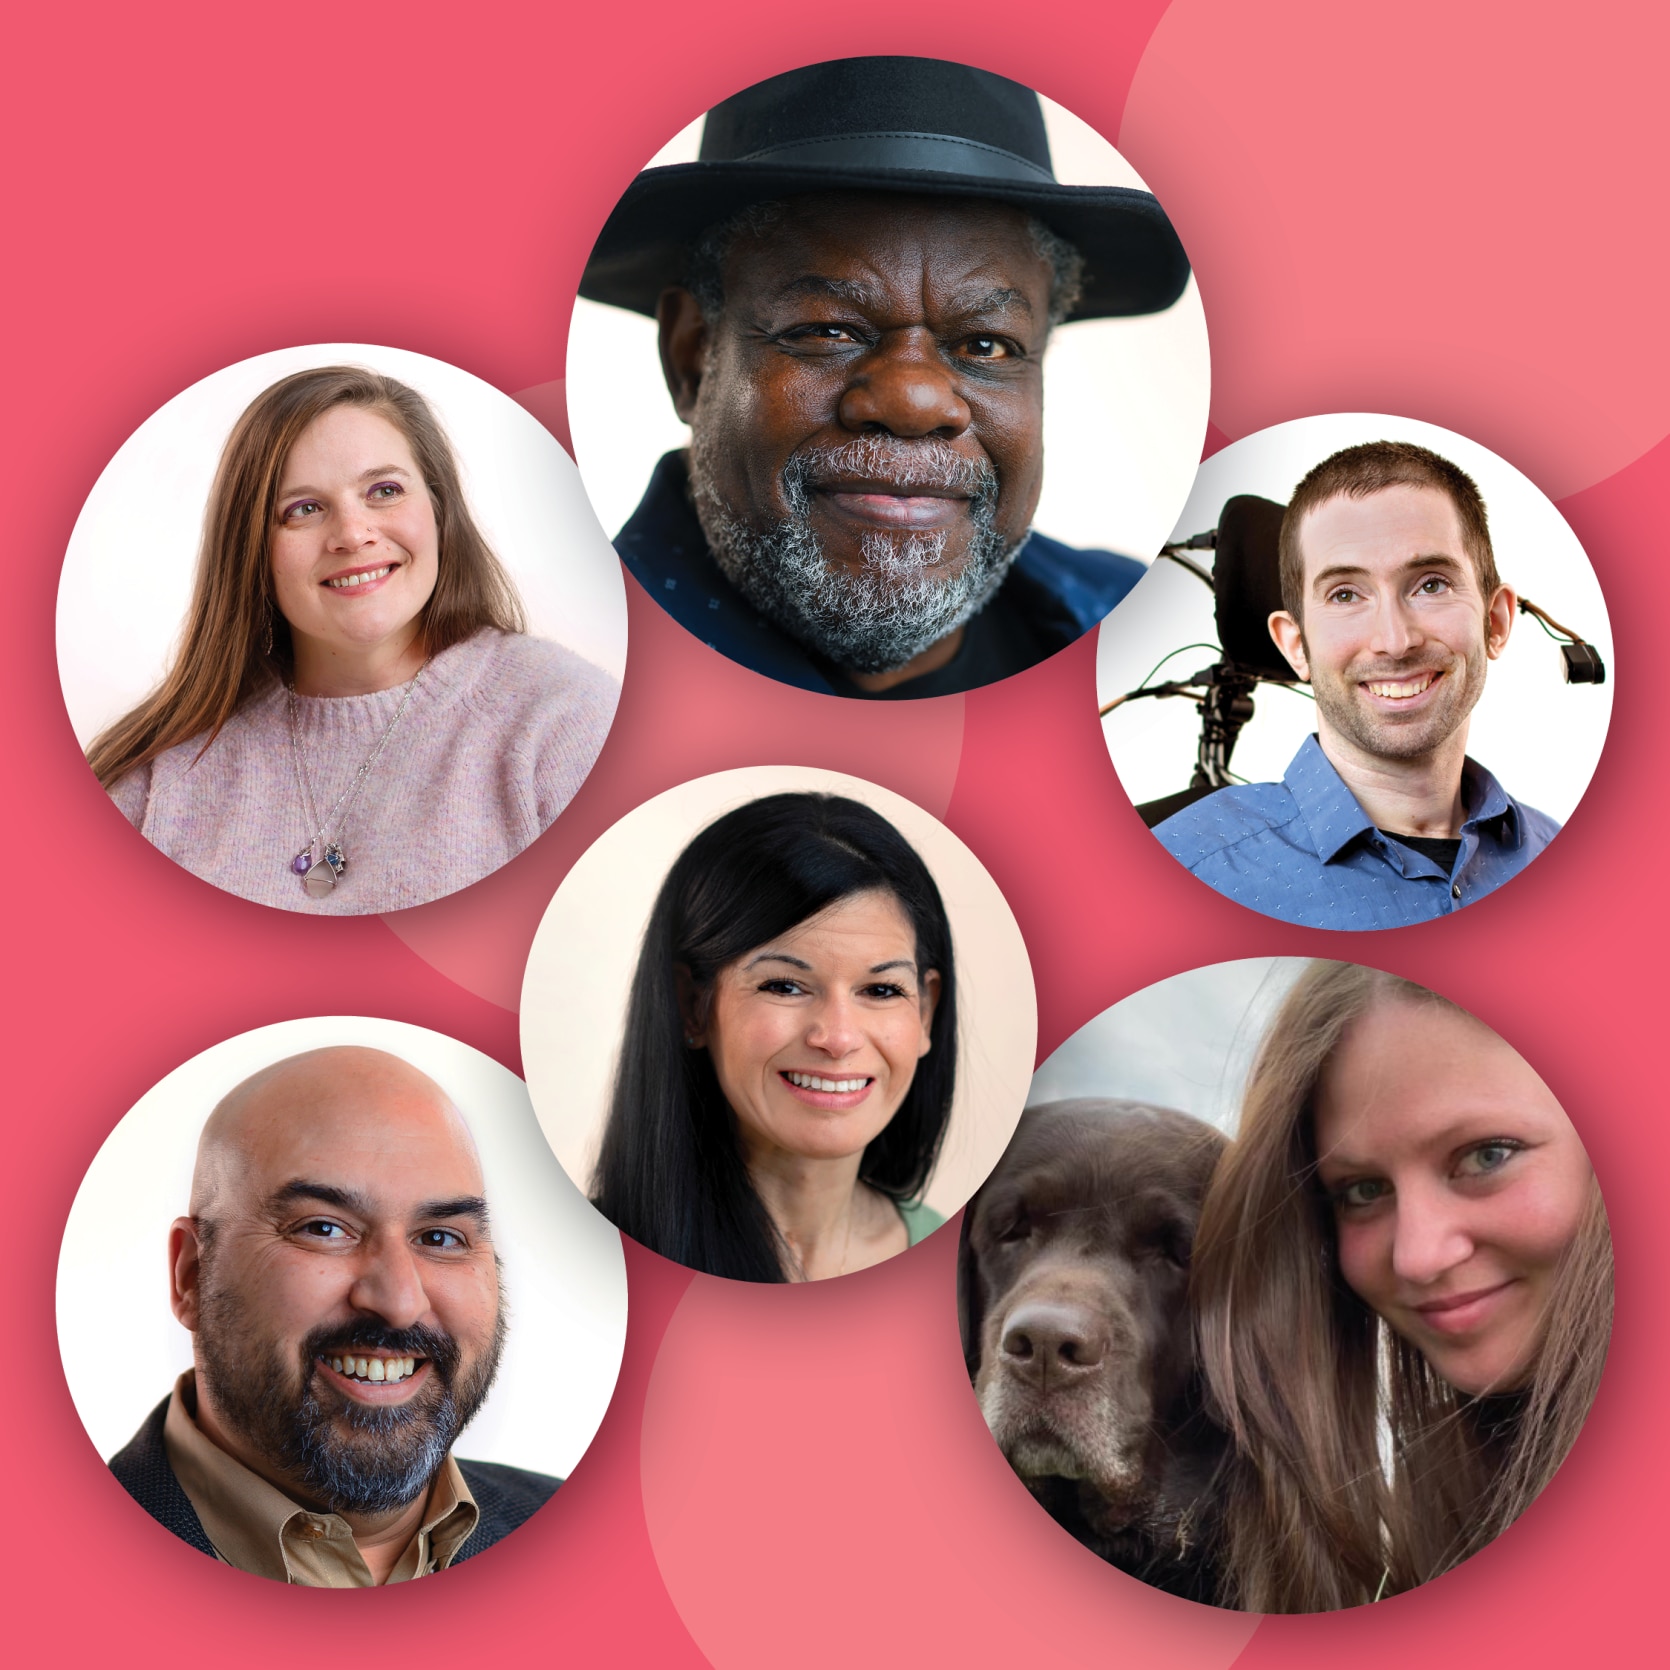 photos of six people set in circles on a pink background